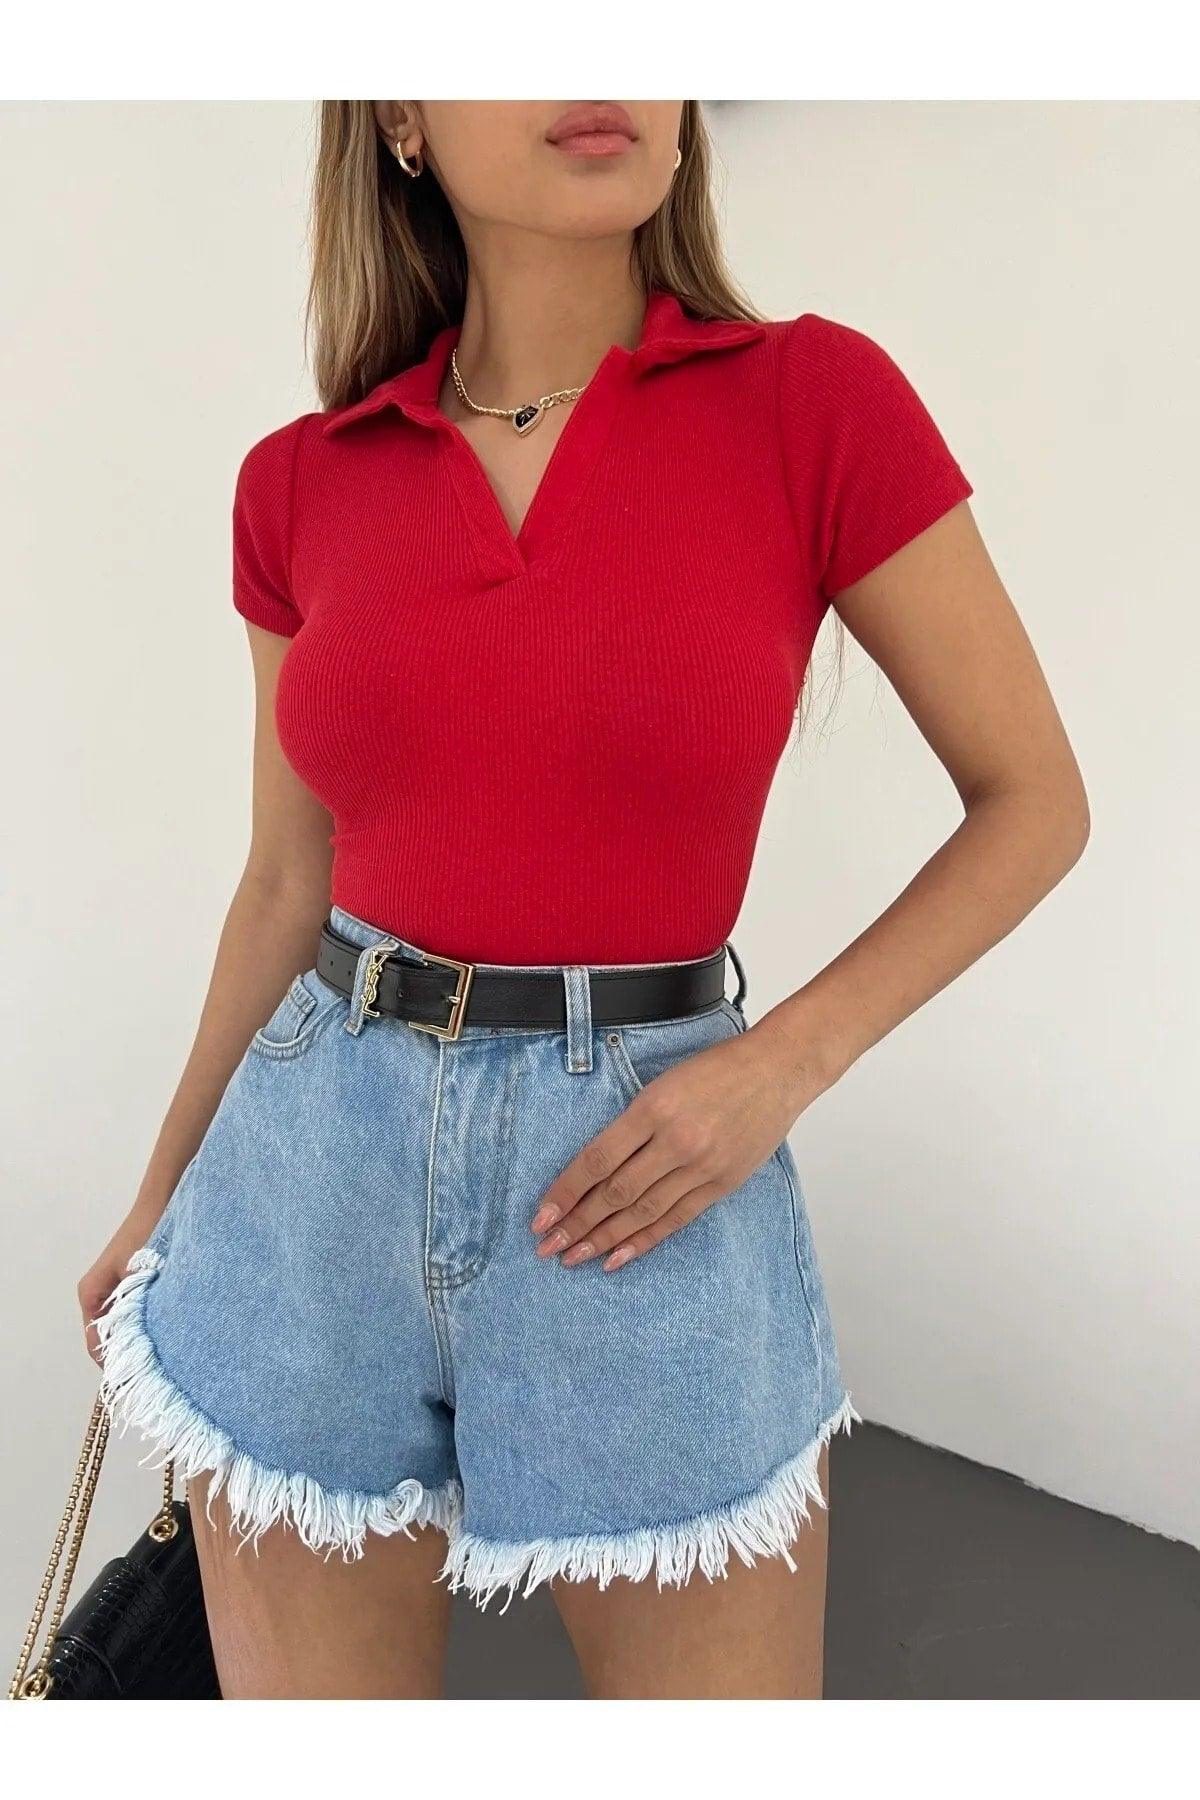 Fitted/Fitted Red Polo Neck Short Sleeve Camisole Crop Blouse - Swordslife